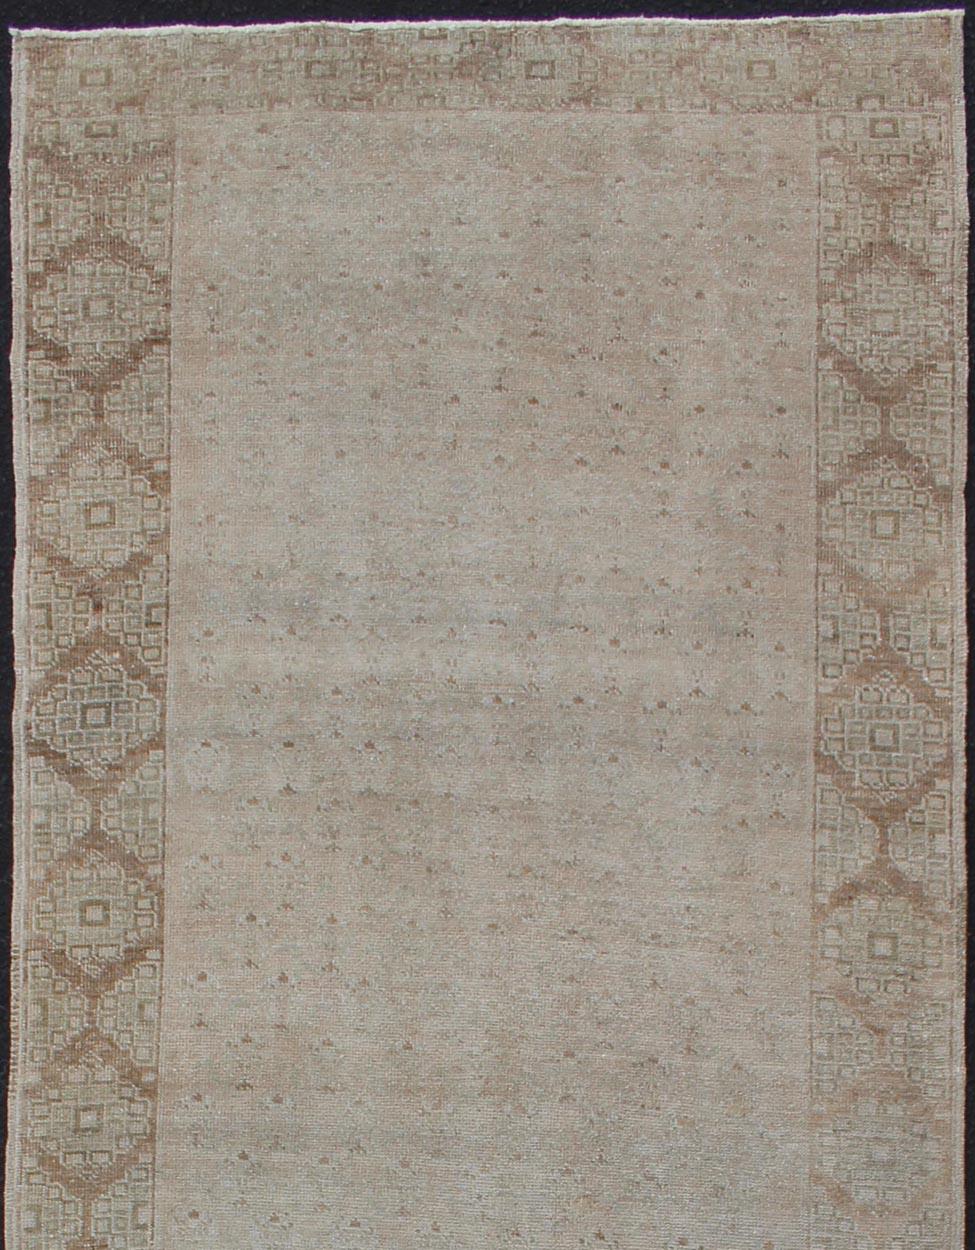 Floral all-over vintage Turkish Oushak runner with faded color palette, Keivan Woven Arts / rug TU-ALK-3583, country of origin / type: Turkey / Oushak, circa 1930

This vintage Turkish Oushak runner (1930) features a unique blend of colors and an